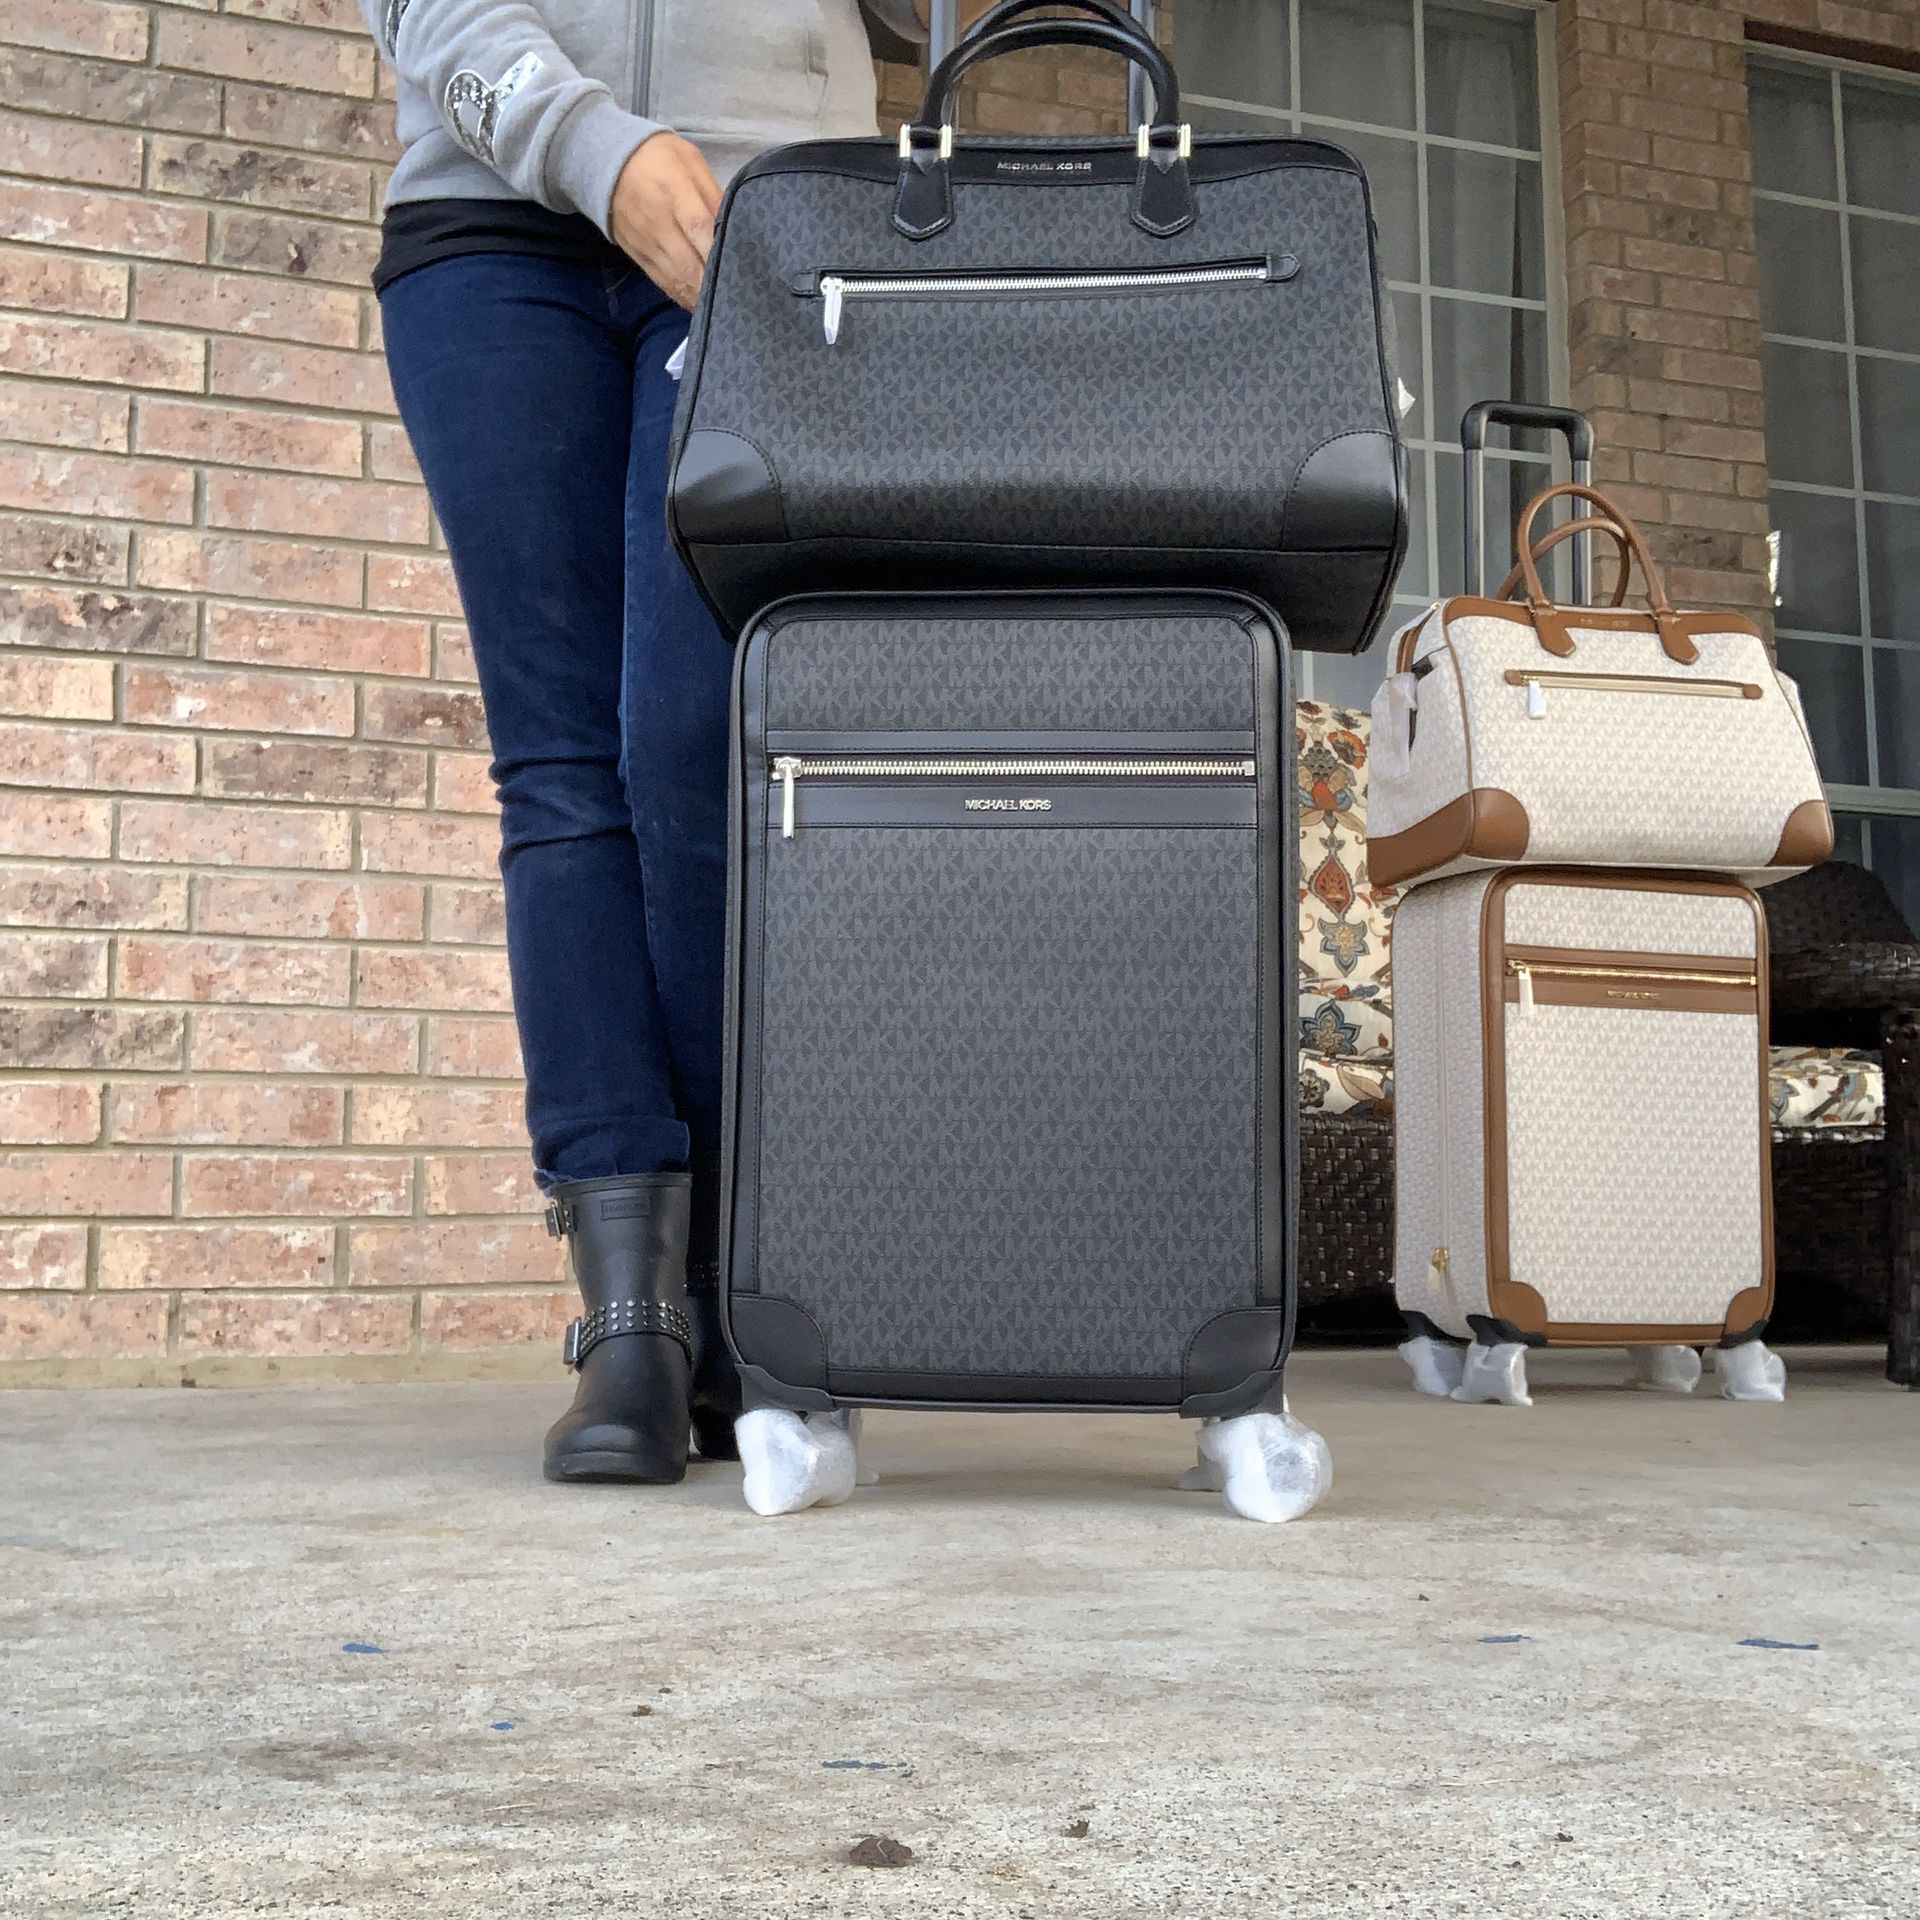 New MK set price firm suitcase and weekender